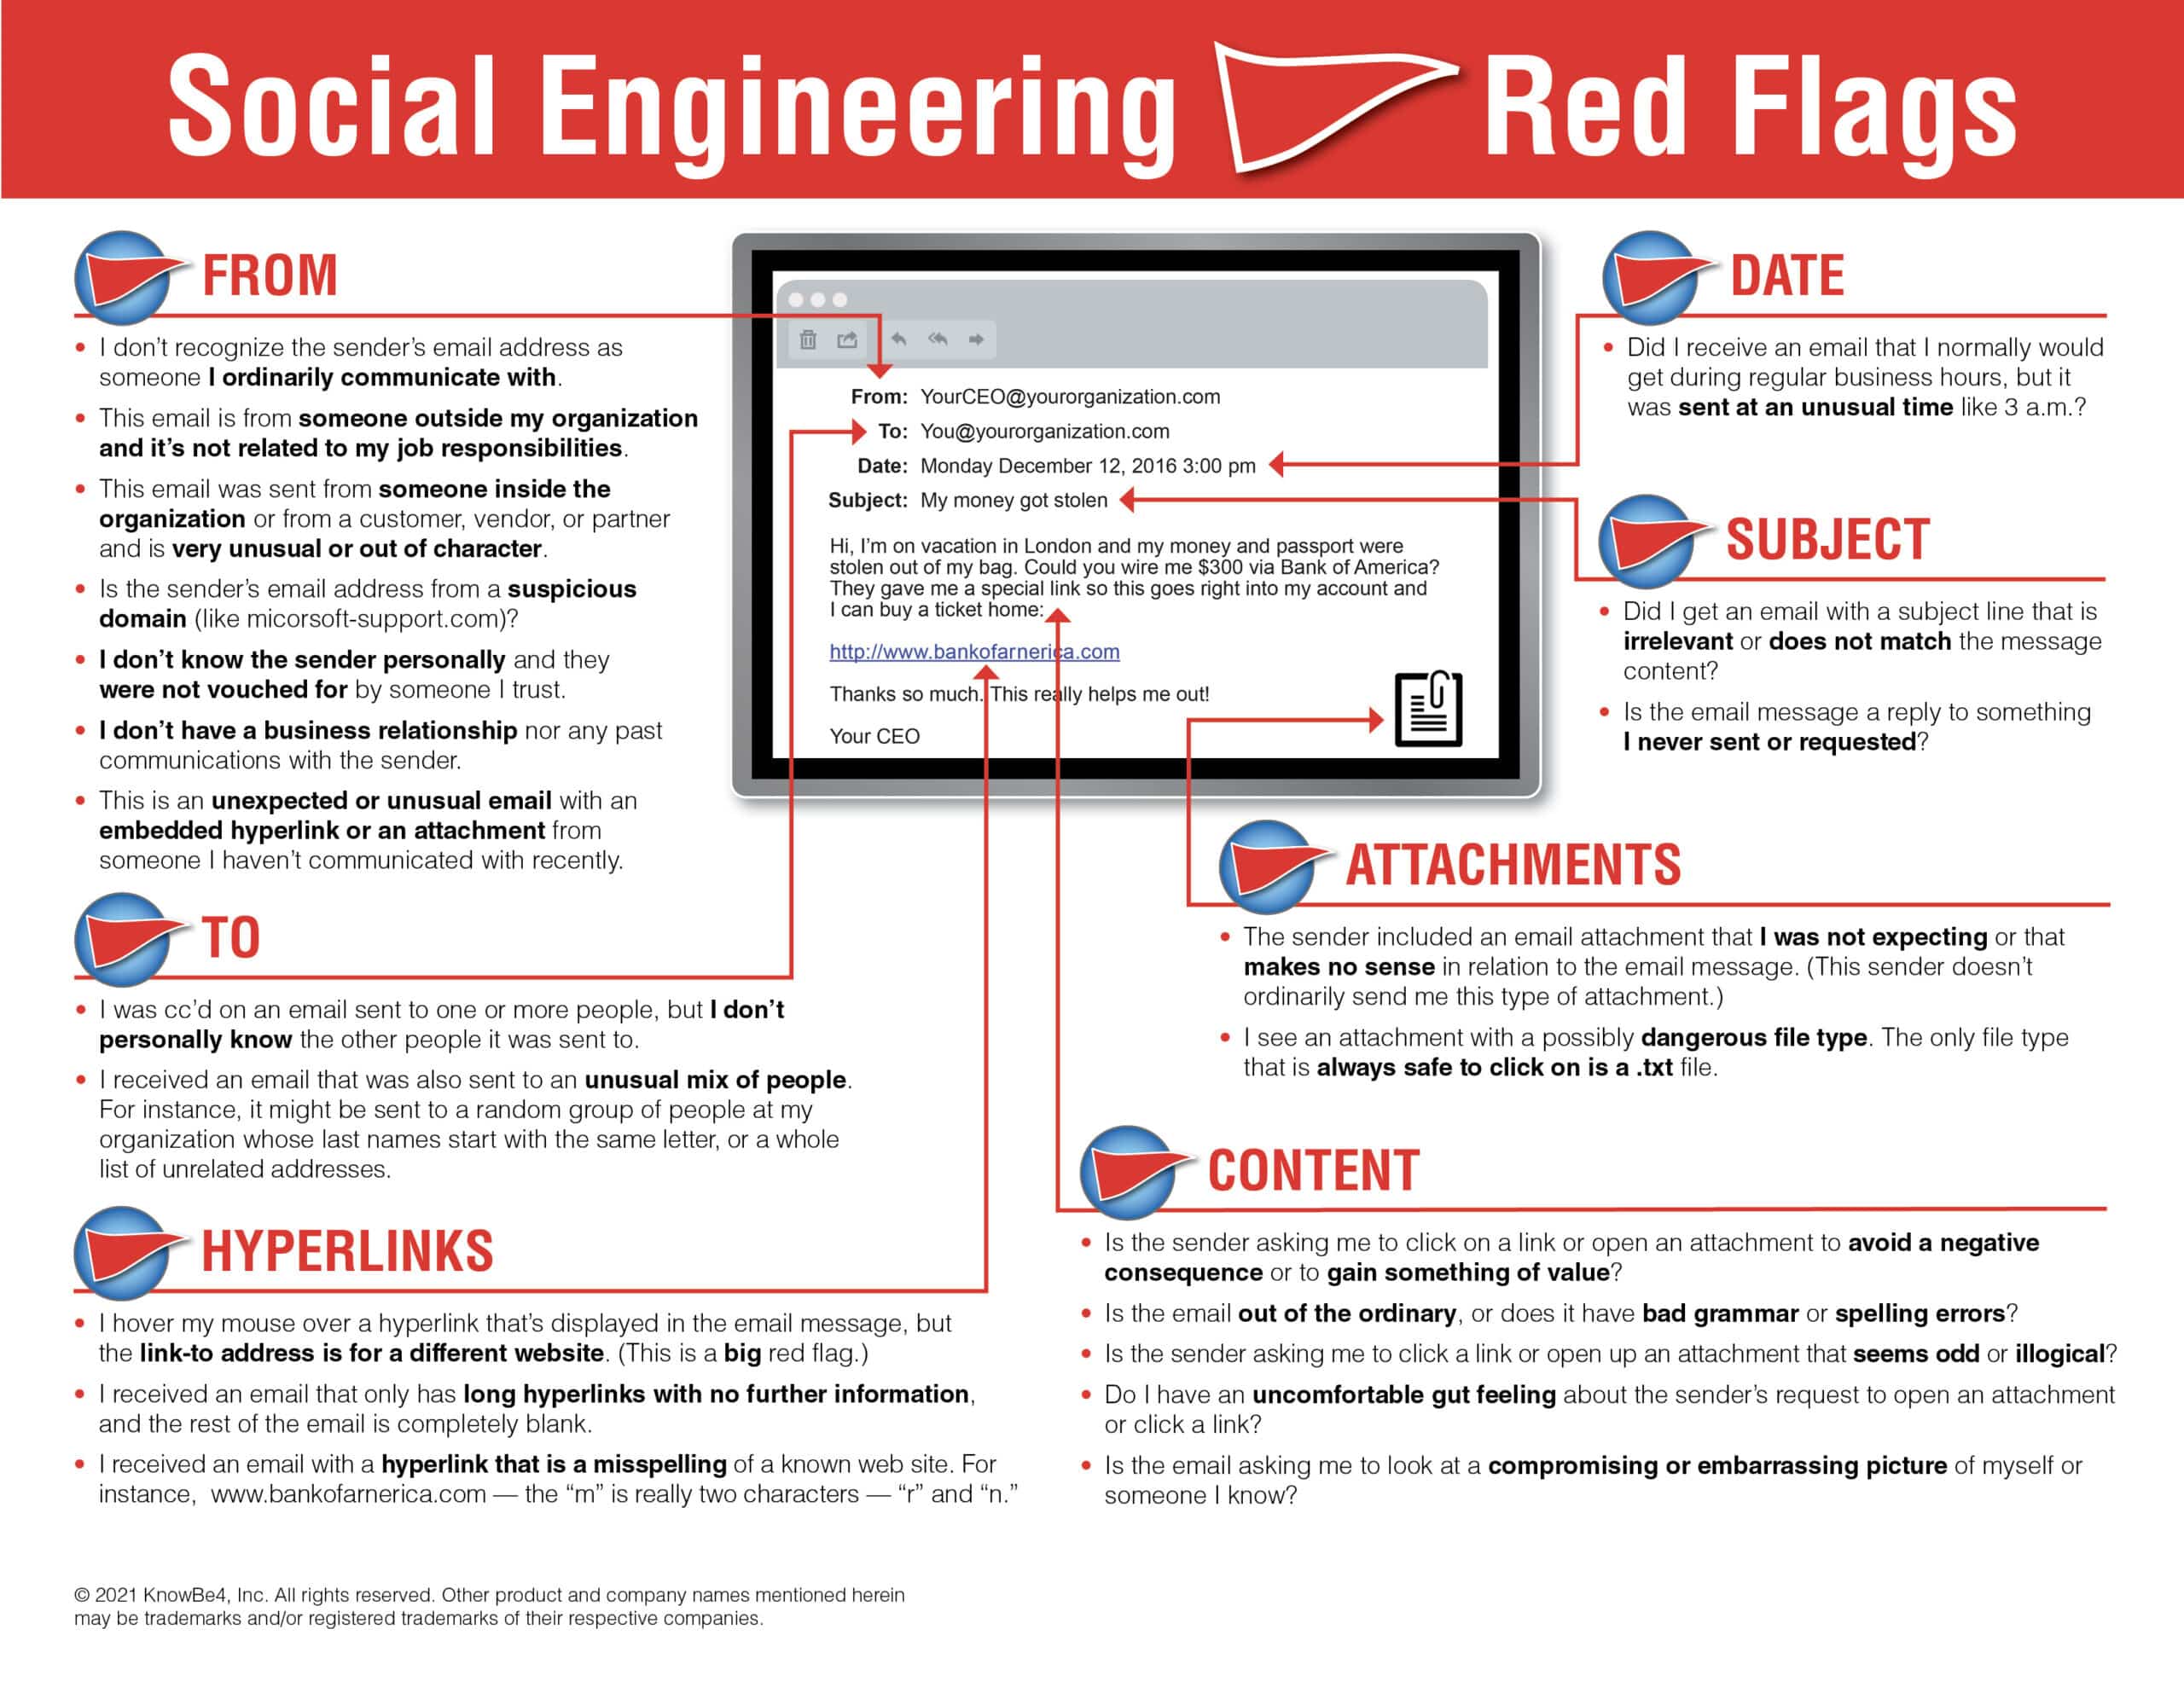 Infographic shows many types of social engineering red flags.